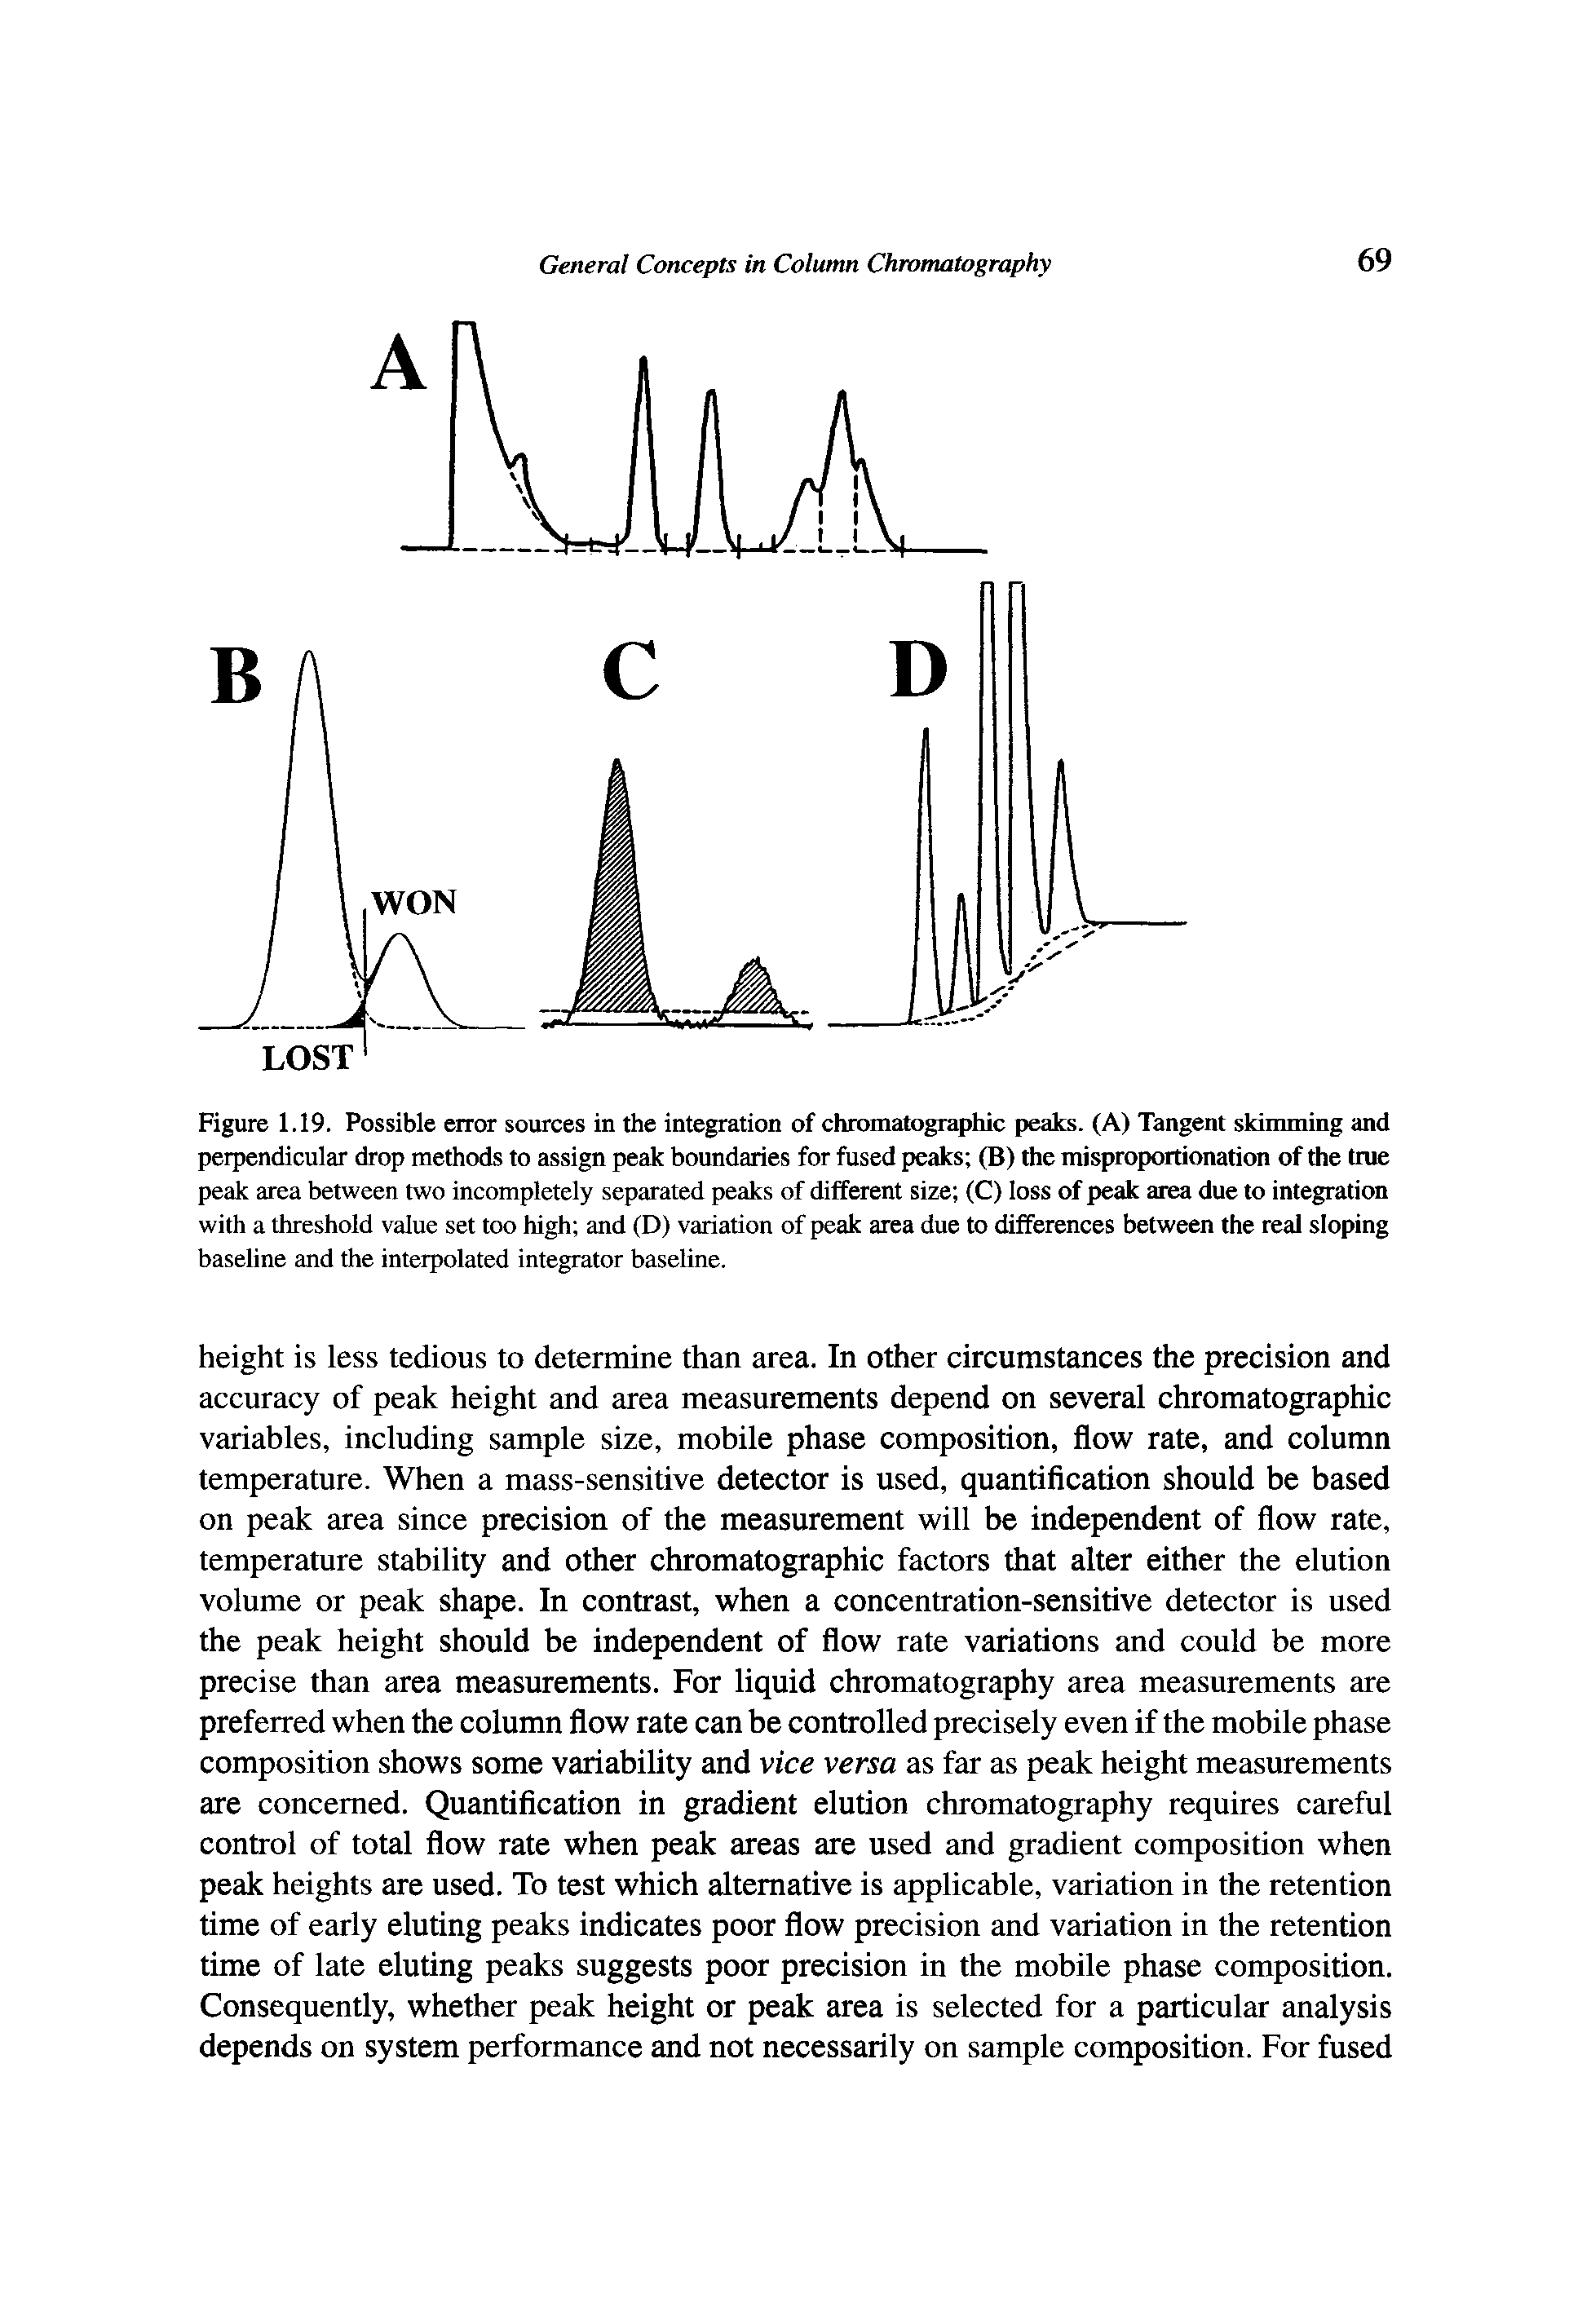 Figure 1.19. Possible error sources in the integration of chromatographic peaks. (A) Tangent skimming and perpendicular drop methods to assign peak boundaries for fused peaks (B) the misproportionation of the true peak area between two incompletely separated peaks of different size (C) loss of peak area due to integration with a threshold value set too high and (D) variation of peak area due to differences between the real sloping baseline and the interpolated integrator baseline.